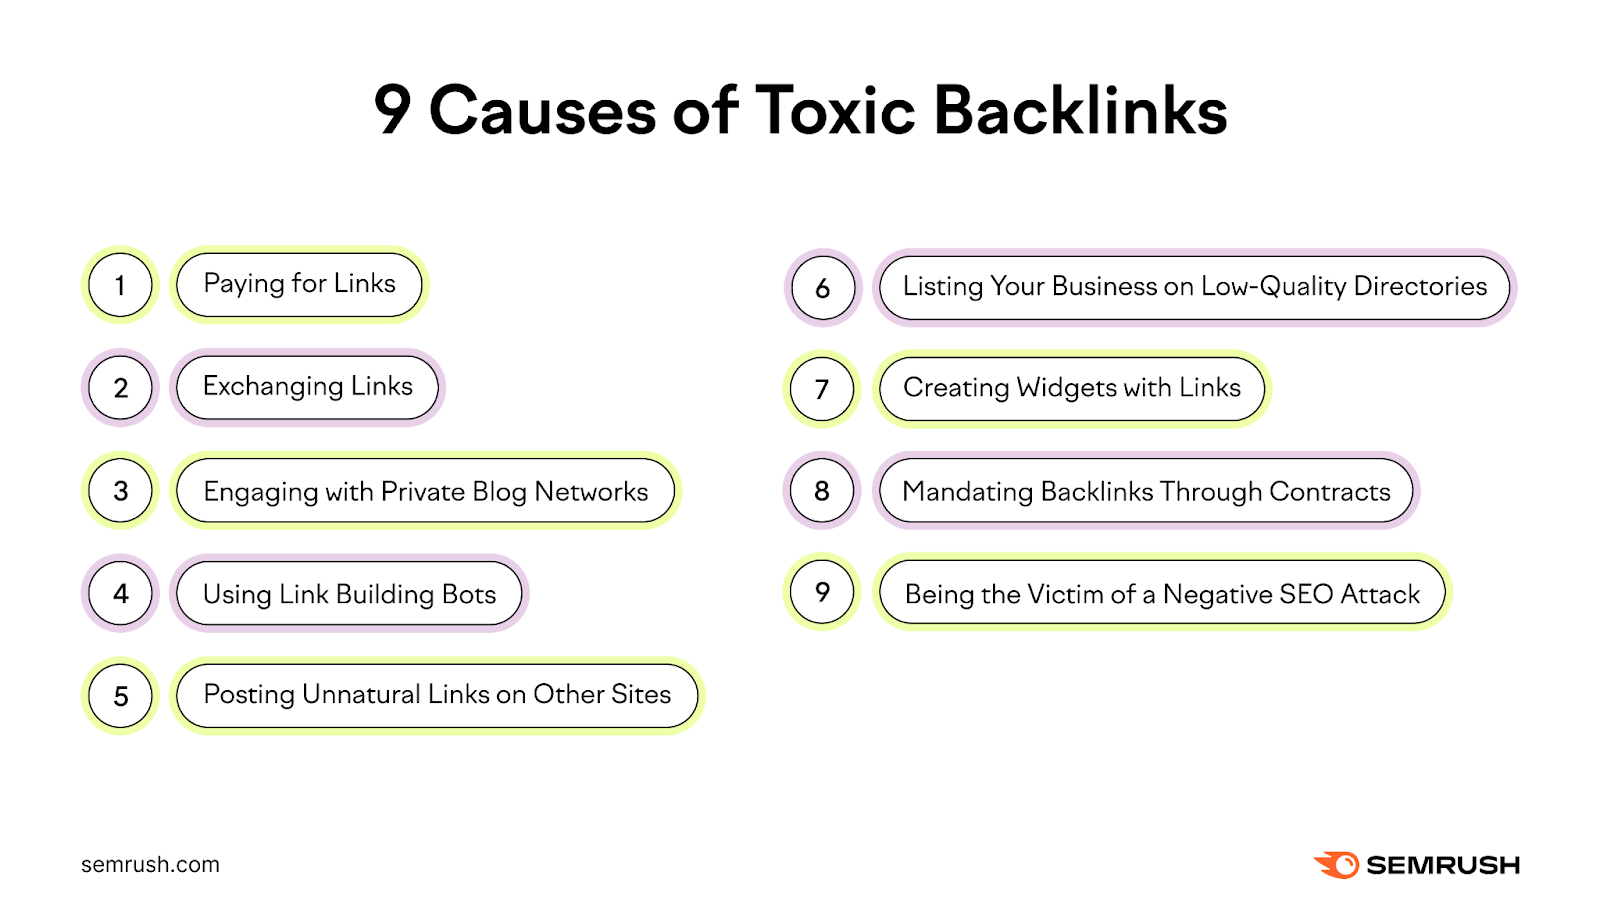 A database  of 9  causes of toxic backlinks